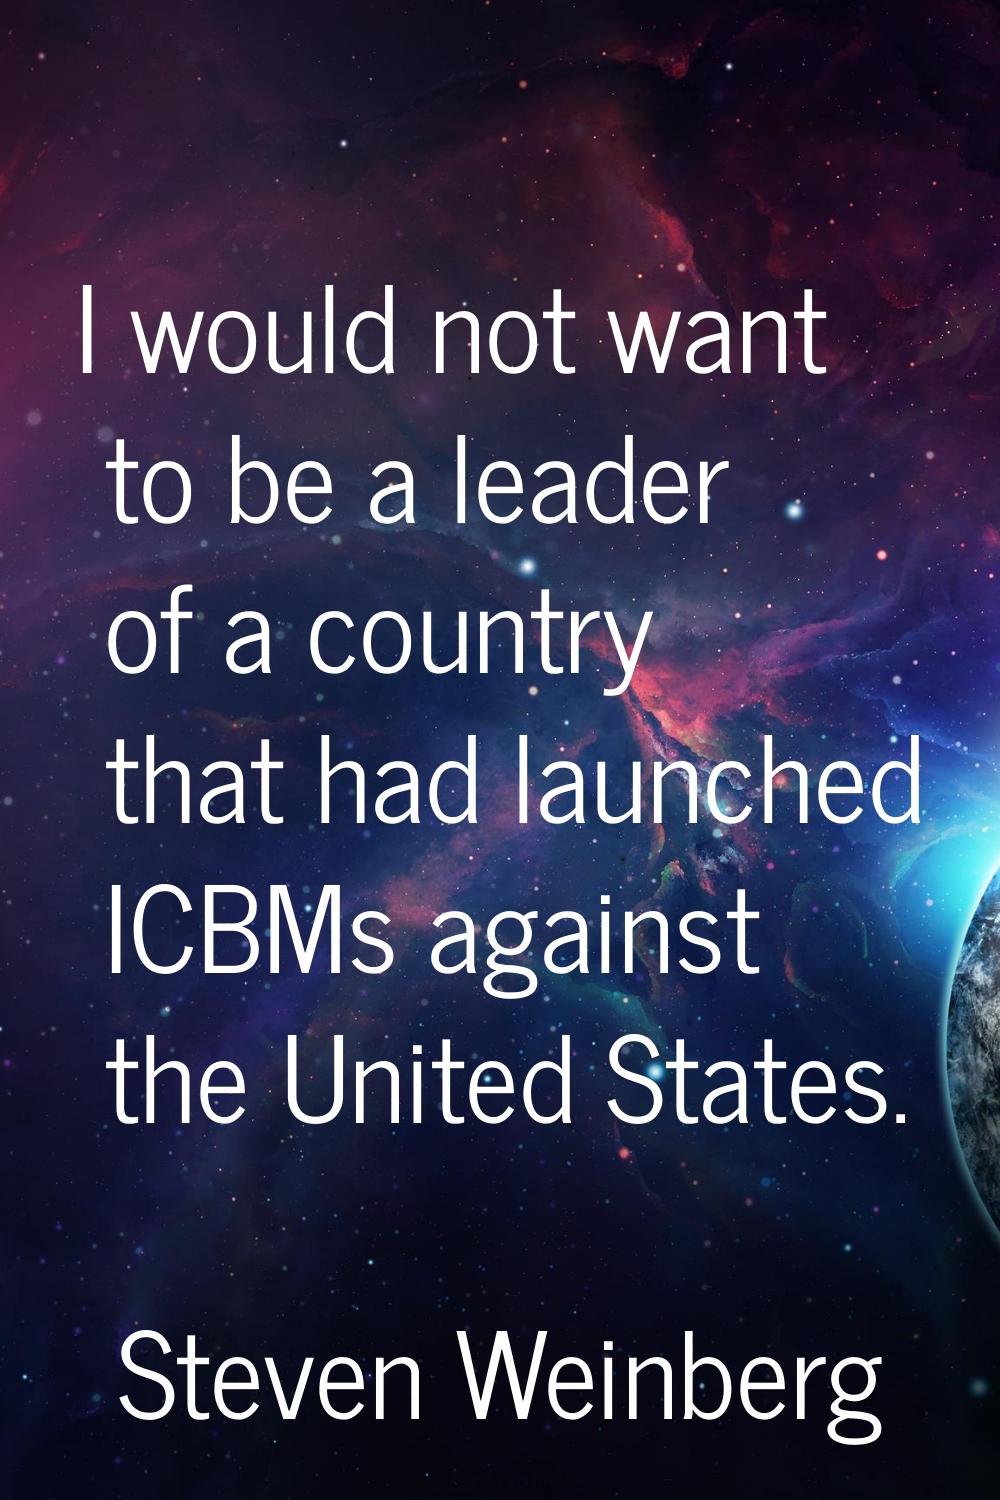 I would not want to be a leader of a country that had launched ICBMs against the United States.